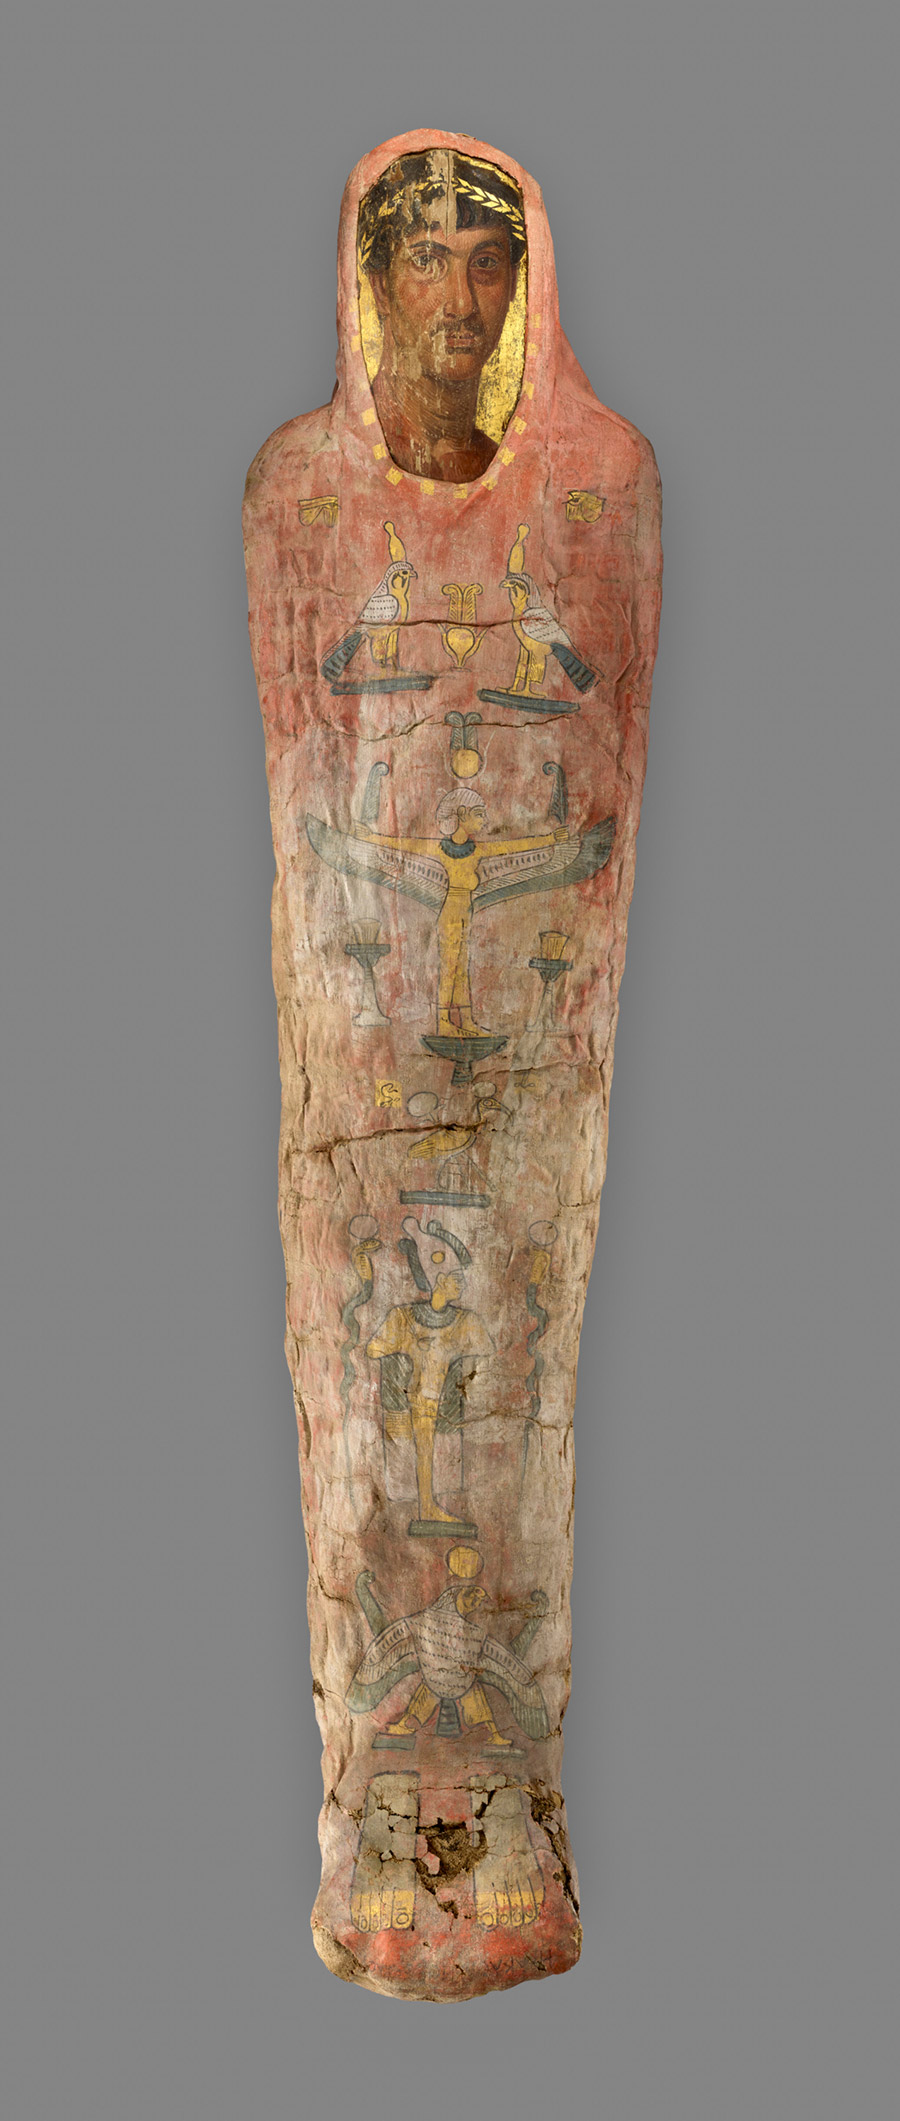 Mummy portrait with red shroud, Getty Museum.